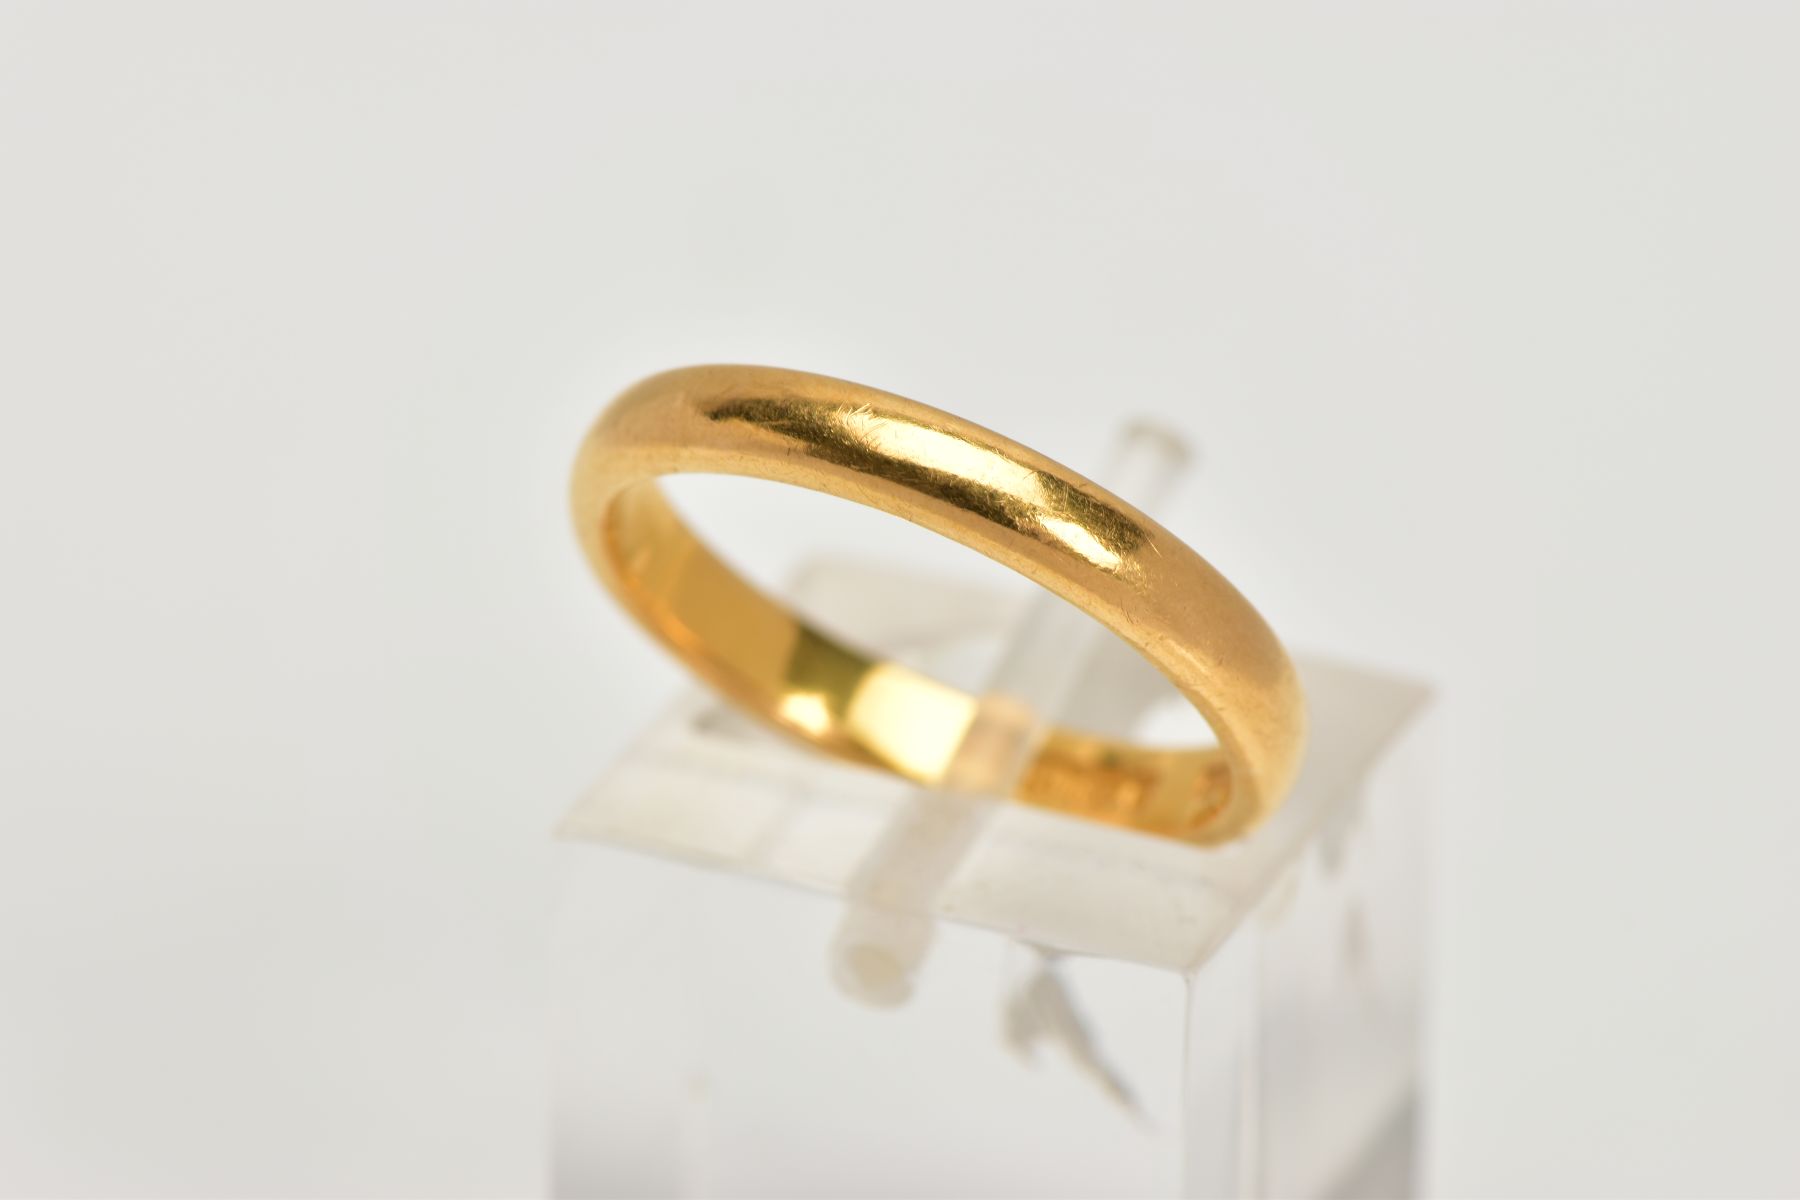 A 22CT GOLD WEDDING BAND, of a plain polished design, hallmarked 22ct gold Birmingham, ring size